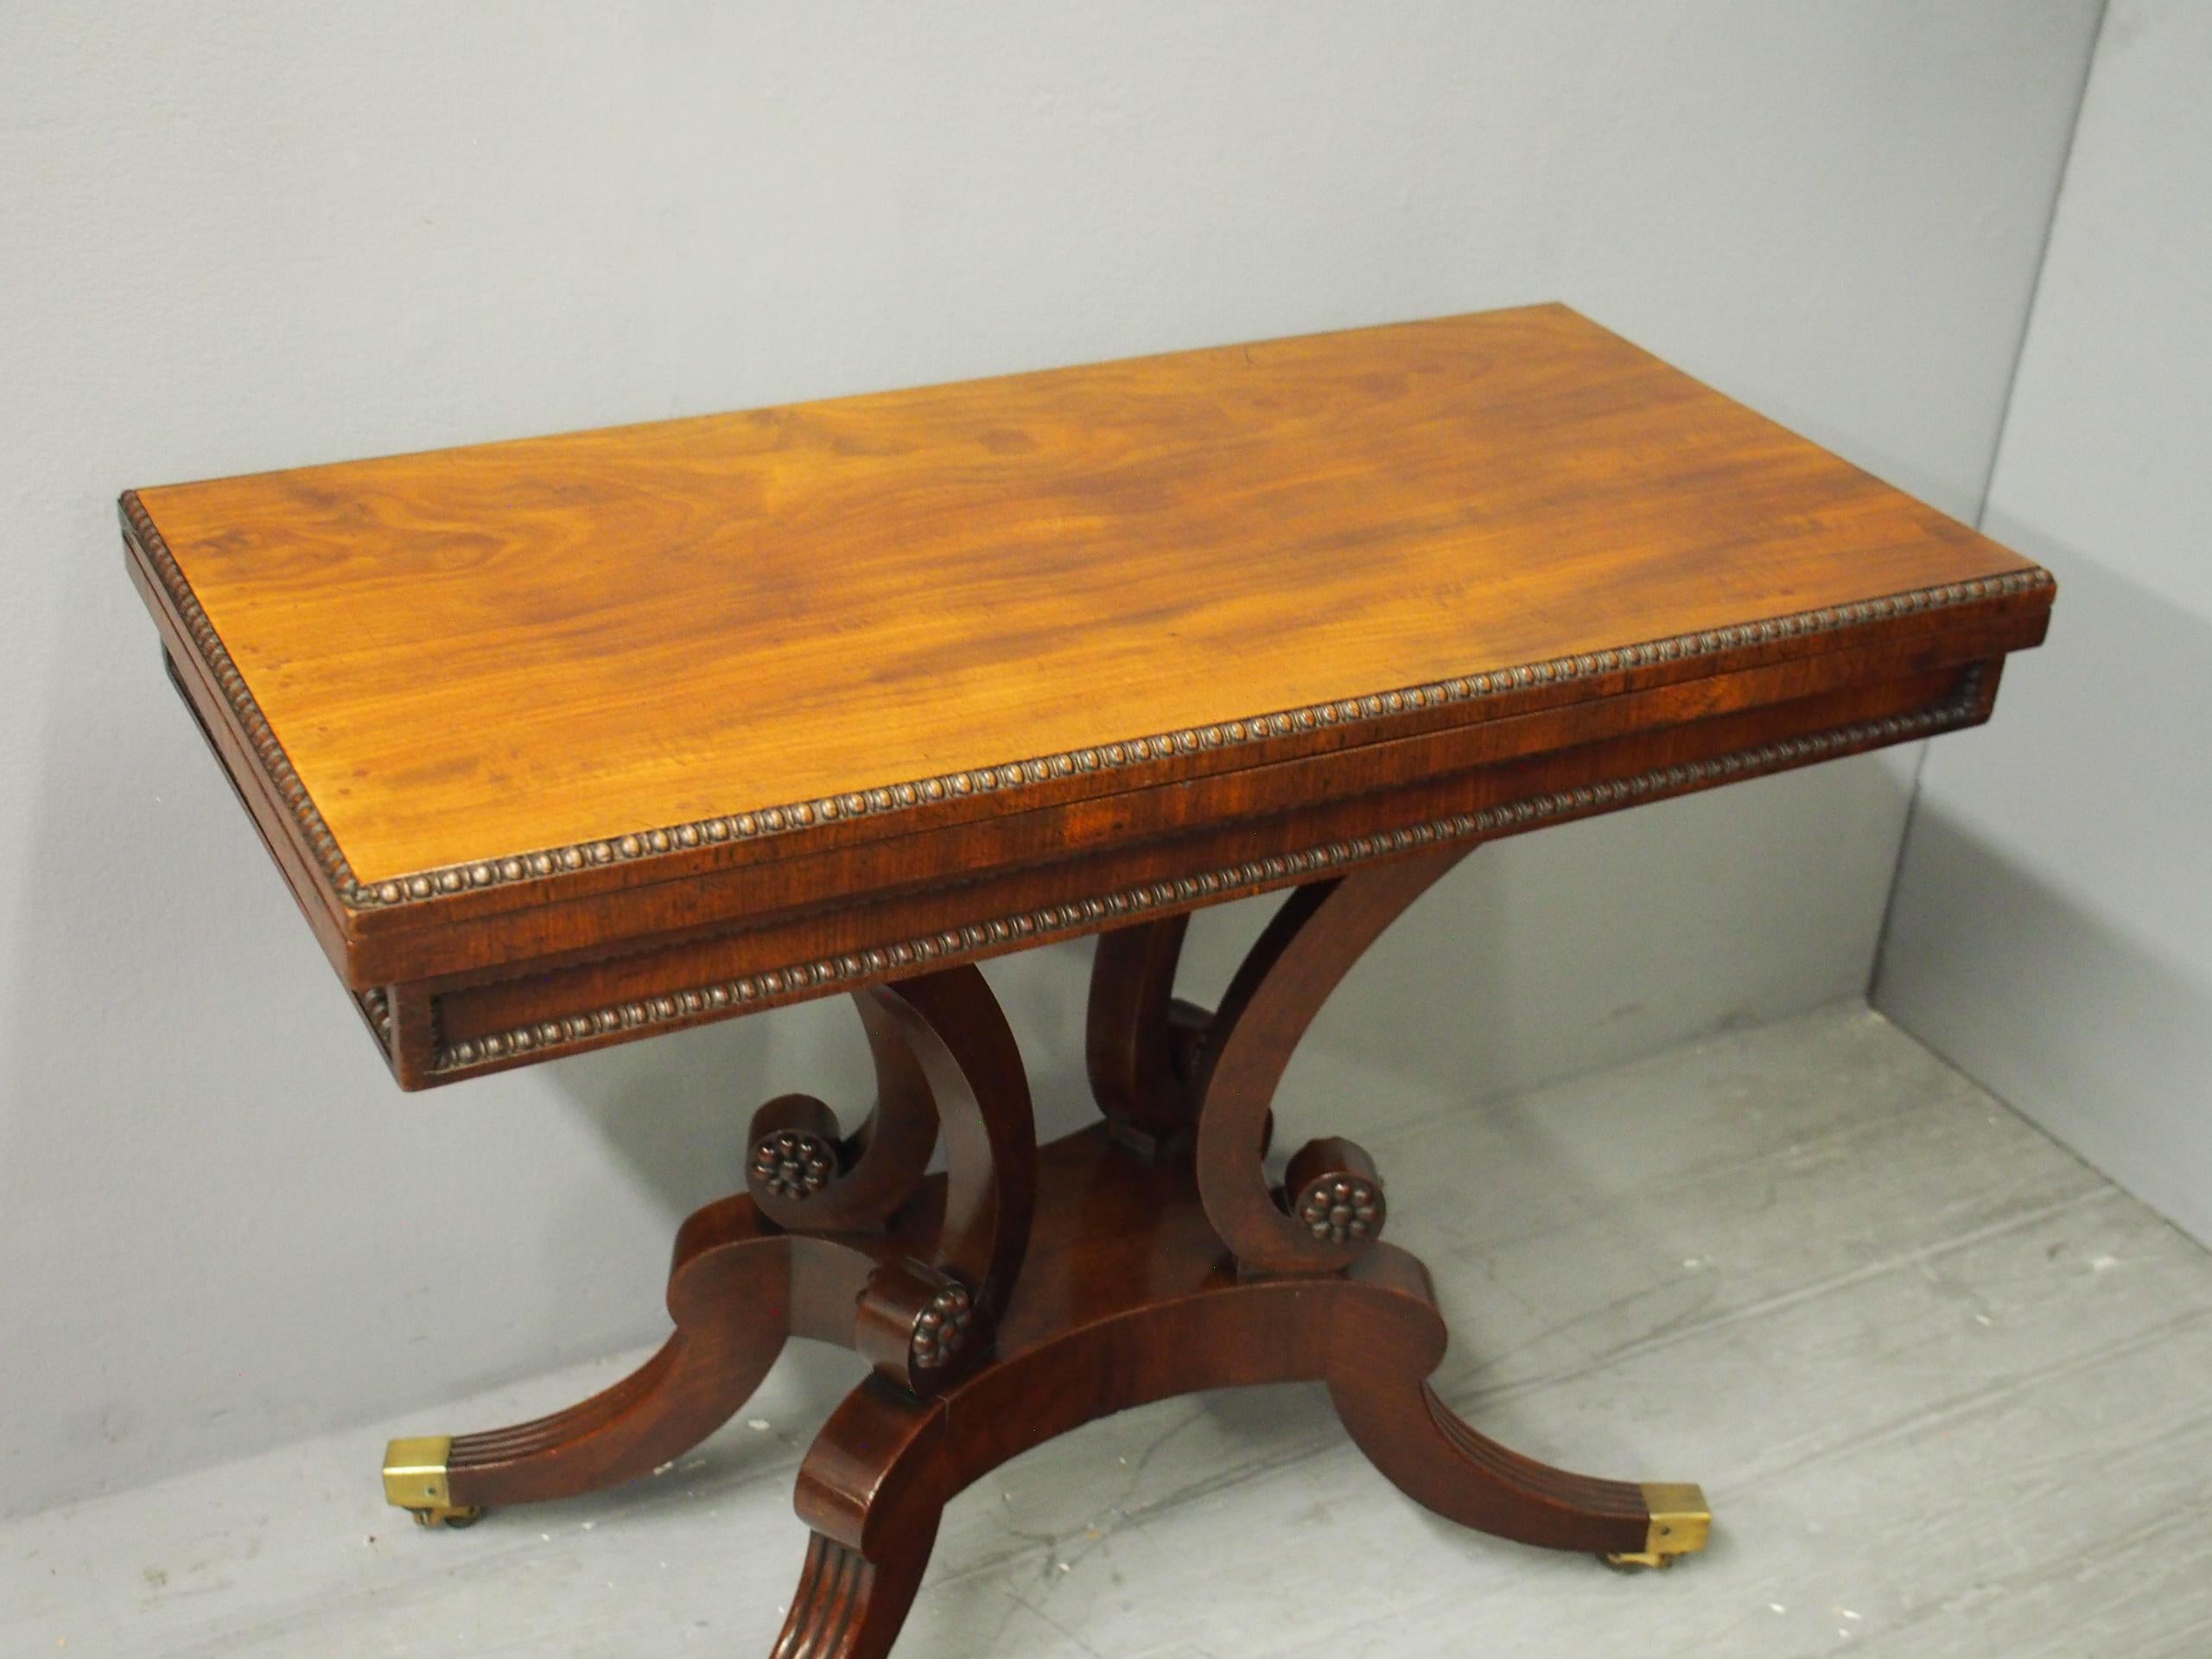 Regency Mahogany Tea Table by William Trotter In Good Condition For Sale In Edinburgh, GB